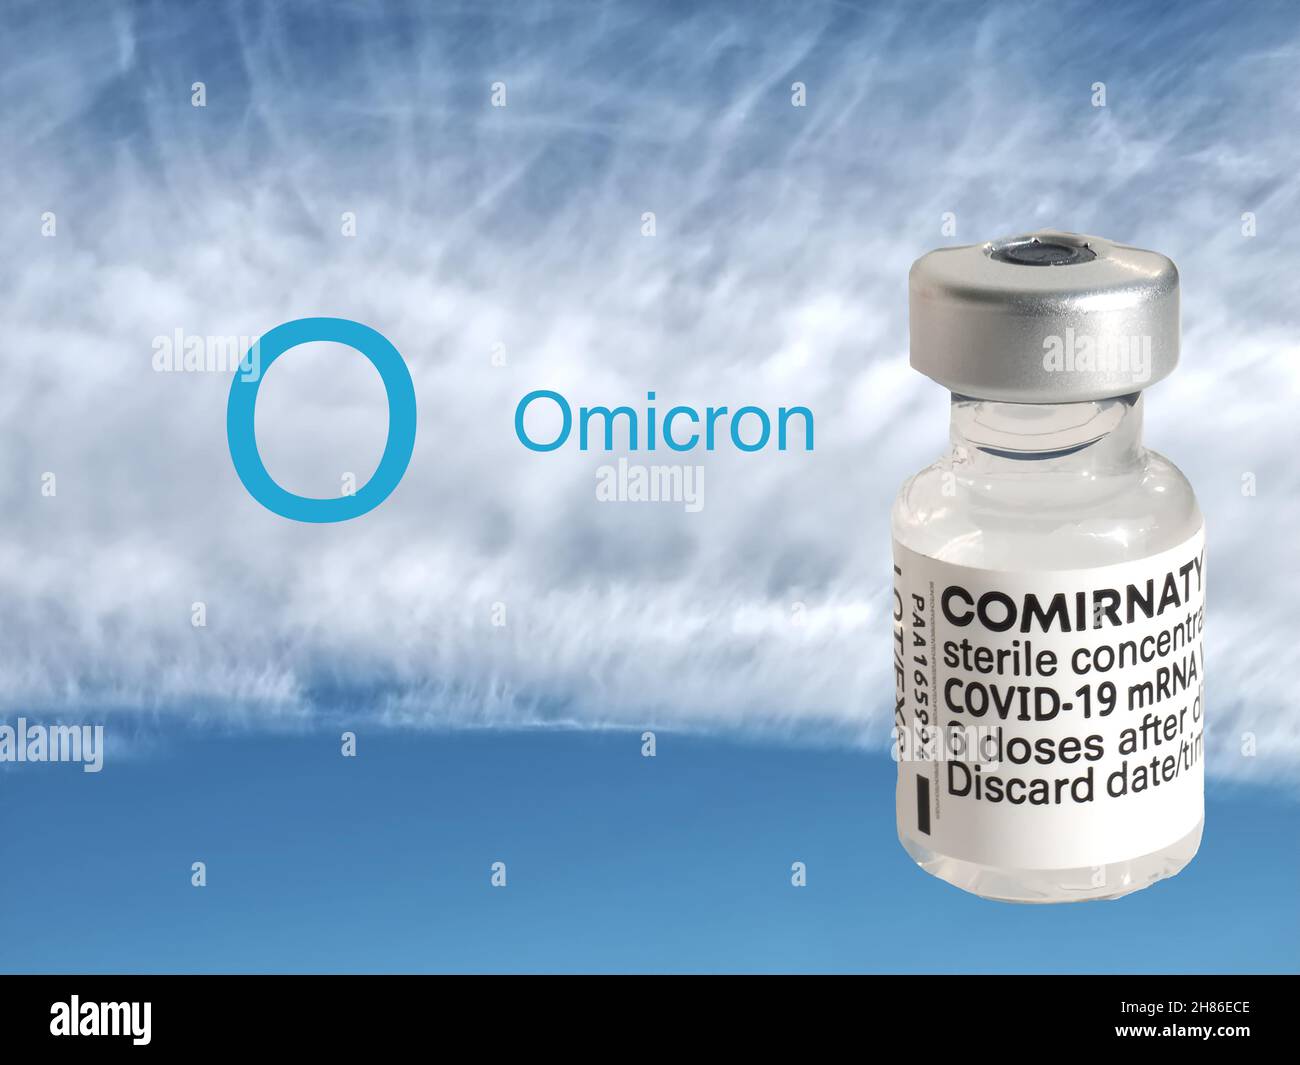 Omicron symbol with Biontech Fizer Vaccine Stock Photo